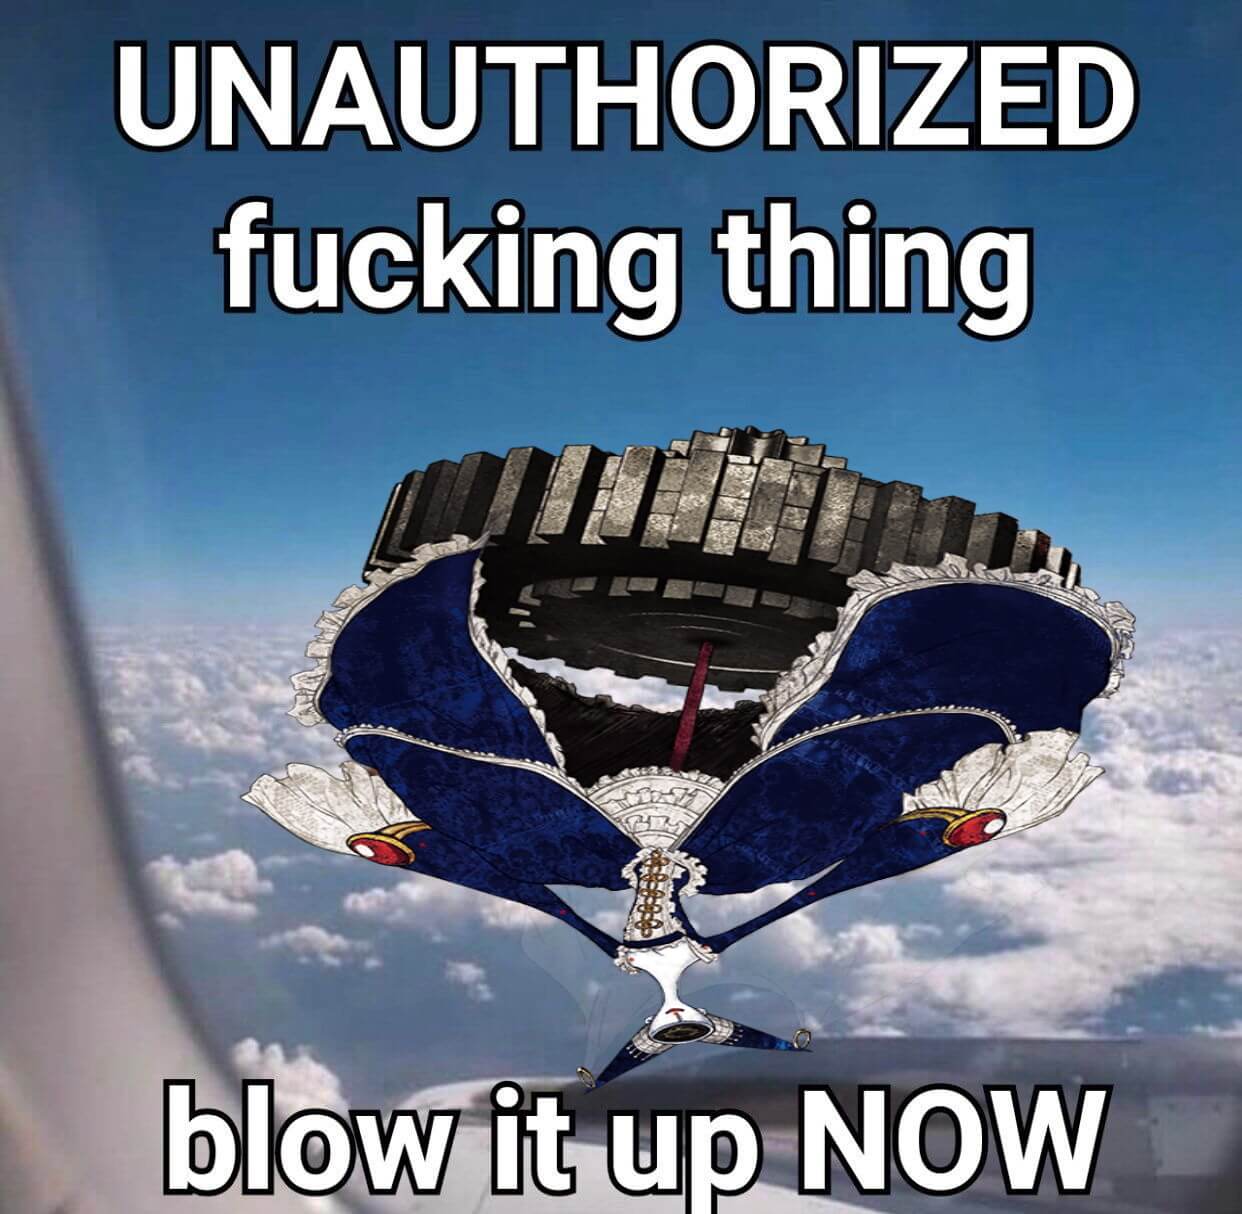 An image of an airplane window, with the witch Walpurgisnacht from the anime Puella Magi Madoka Magica edited onto the sky. The caption reads: UNAUTHORIZED fucking thing / blow it up NOW